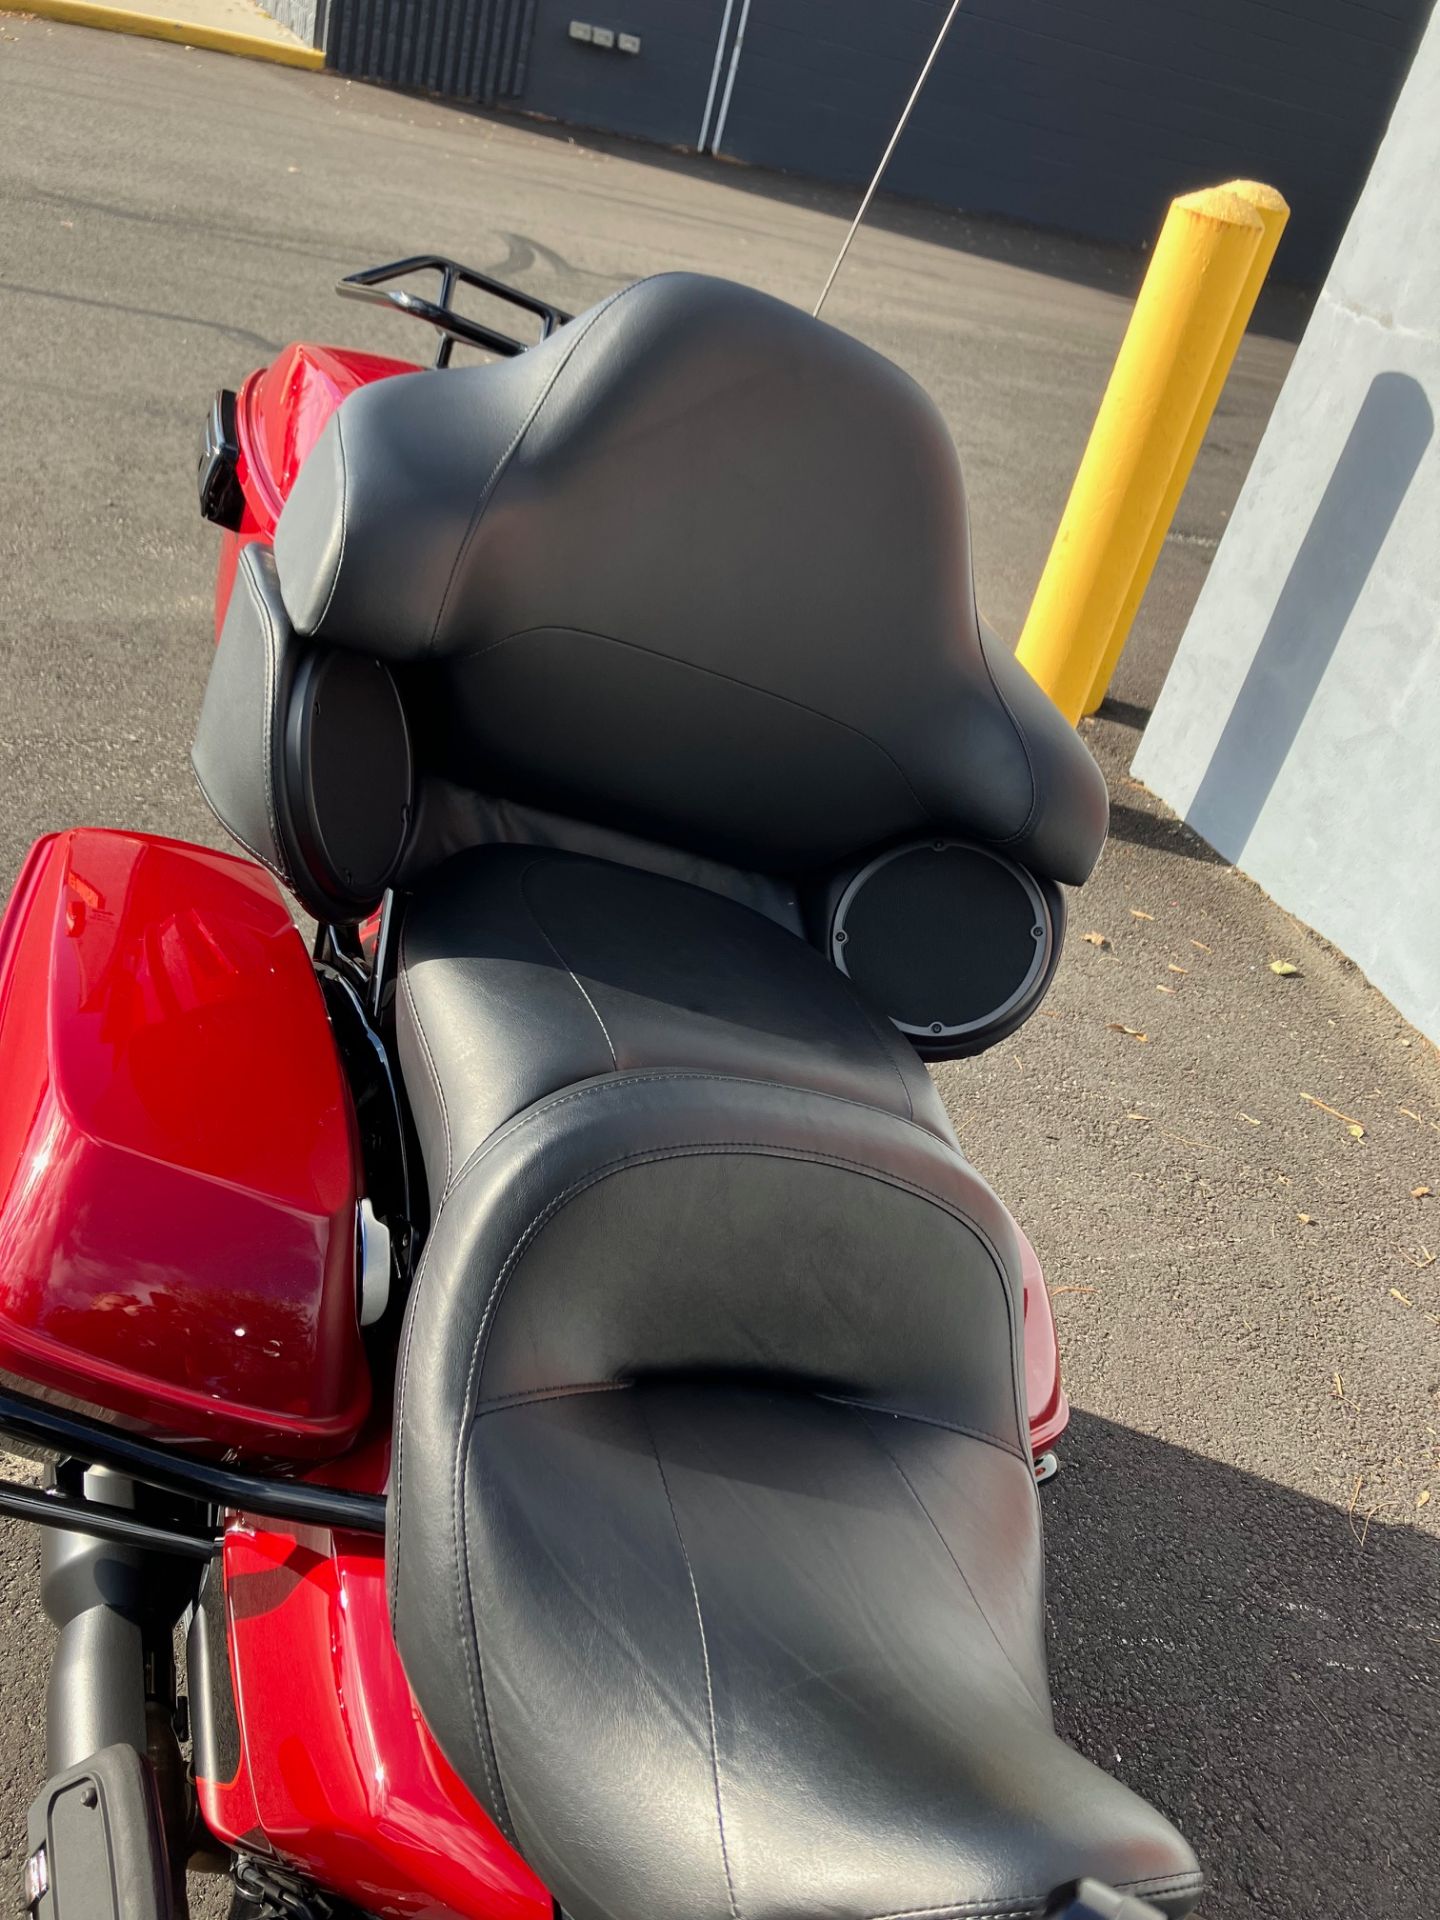 2020 Harley-Davidson ROAD GLIDE LIMITED in West Long Branch, New Jersey - Photo 13